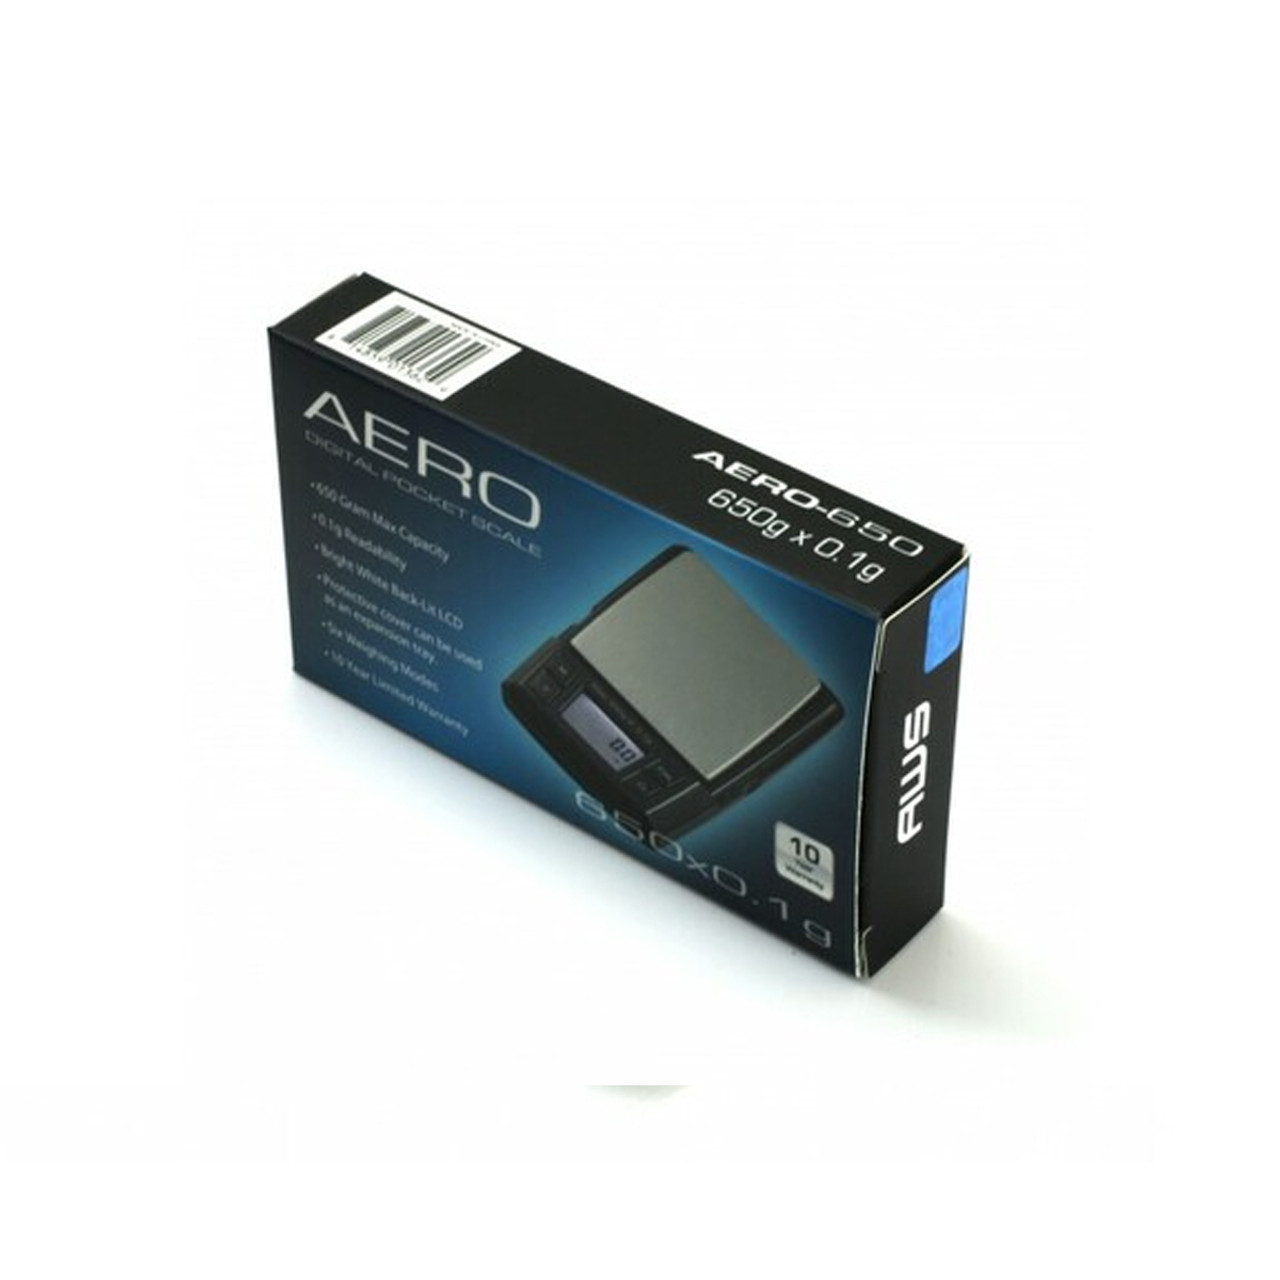 American Weigh Scales AC Pro Series Digital Pocket Weight Scale-Black 650g  x 0.1